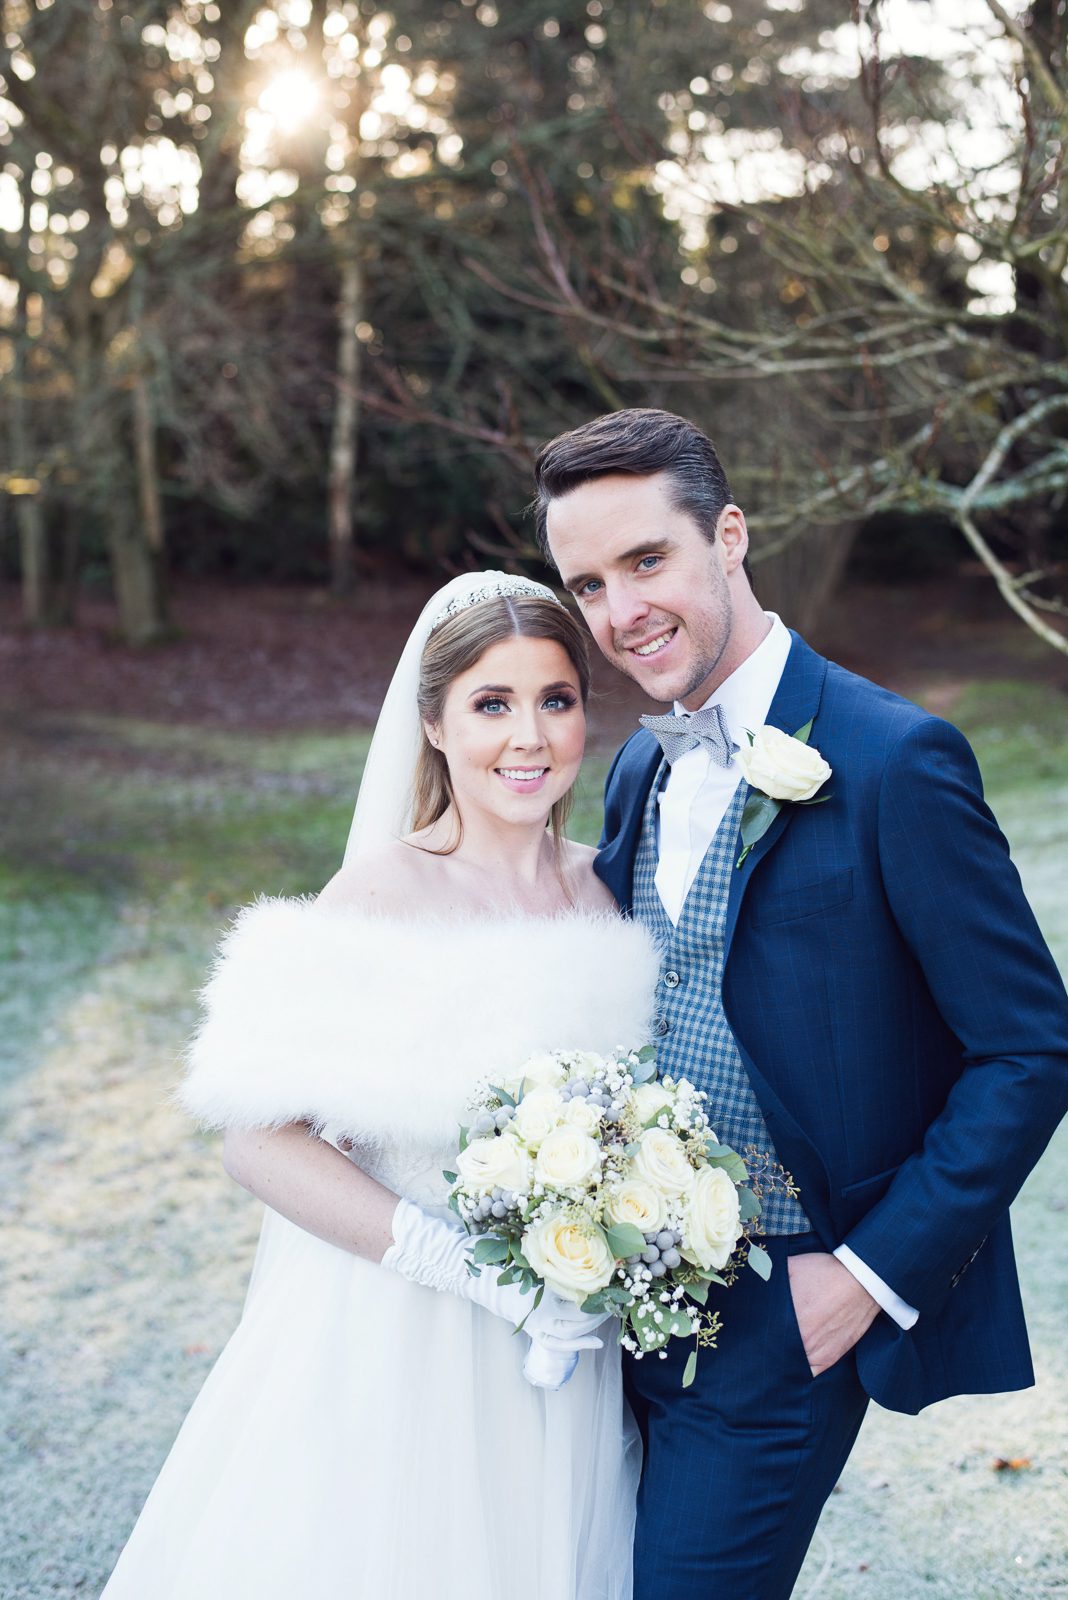 Winter bride and groom portraits at Pennyhill Park by Surrey wedding photographer Juliet Mckee.